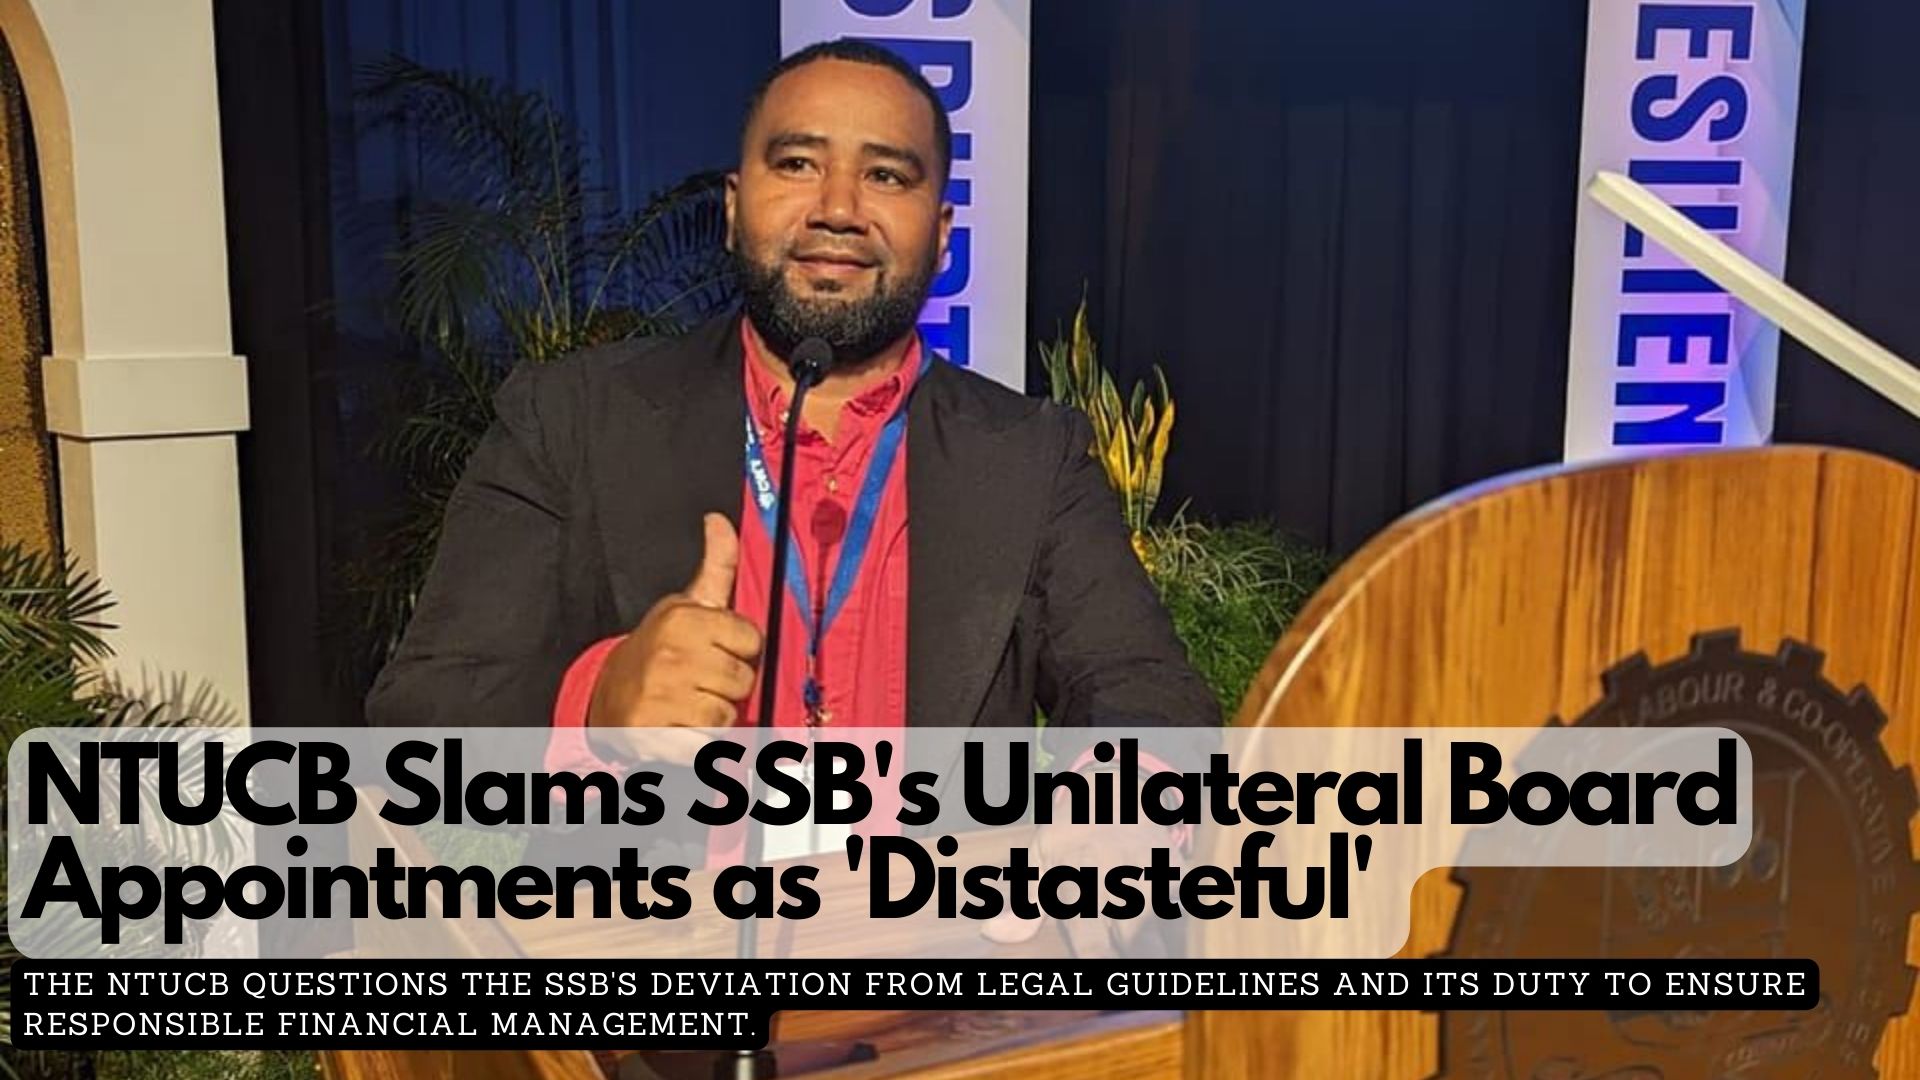 NTUCB Slams SSB's Unilateral Board Appointments as 'Distasteful' 